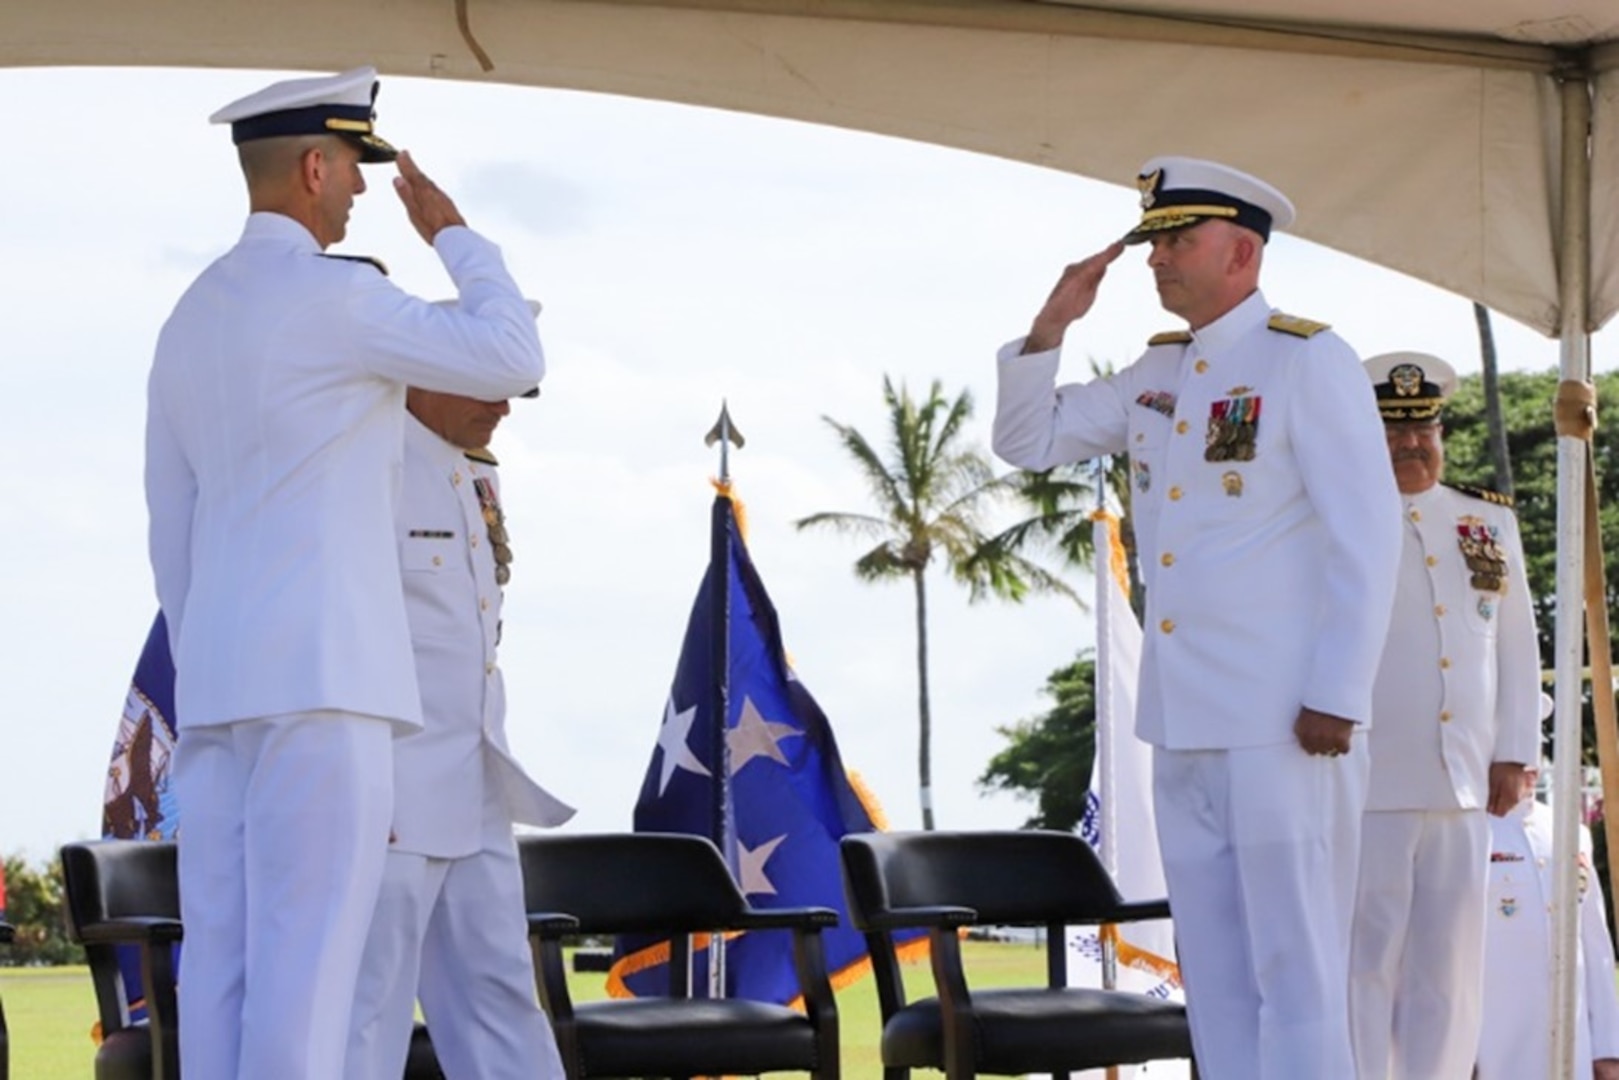 Camp H.M. Smith, Hawaii (July 12, 2023) Rear Adm. Bob Little, right, relieves Rear Adm. Charles Fosse, left, as Director of Joint Interagency Task Force- West (JIATF- West). Rear Adm. Little becomes the 20th director of JIATF- West, the executive agent for counter narcotics within the U.S. Indo-Pacific Command (USINDOPACOM) area of operations. As the JIATF- West Ddirector, he is charged with leading roughly 100 Soldiers, Sailors, Marines, Airmen, Coast Guardsmen, and Department of Defense civilians and is responsible for assisting U.S. law enforcement efforts in countering narcotics and the flow of illicit chemicals bound for the Western Hemisphere within the Indo-Pacific. (Photo by Chelsey Kaneshiro)